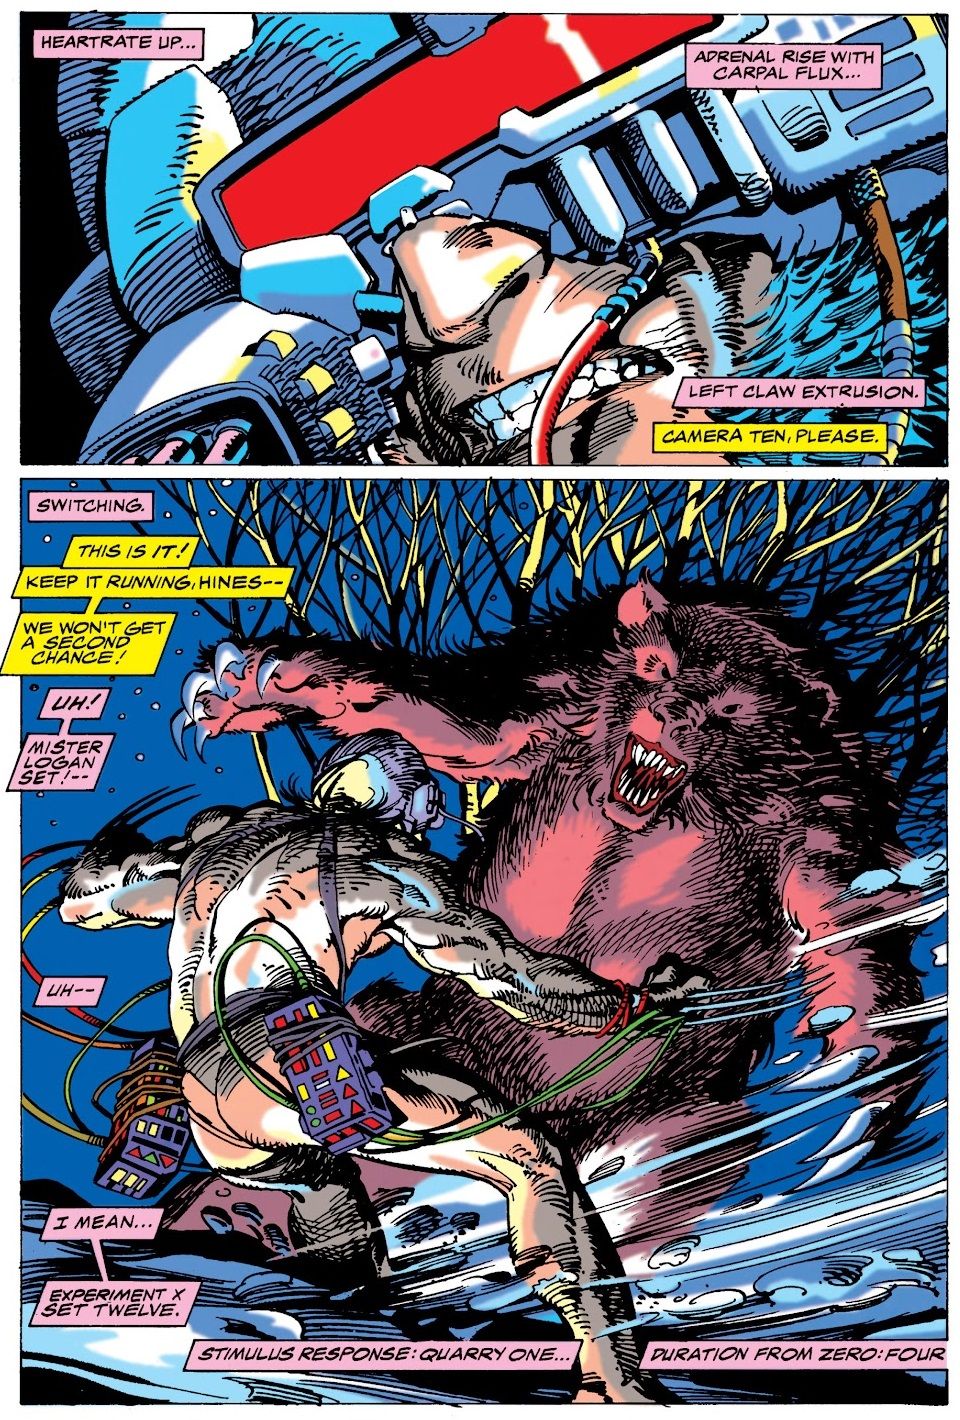 Weapon X fights against a bear